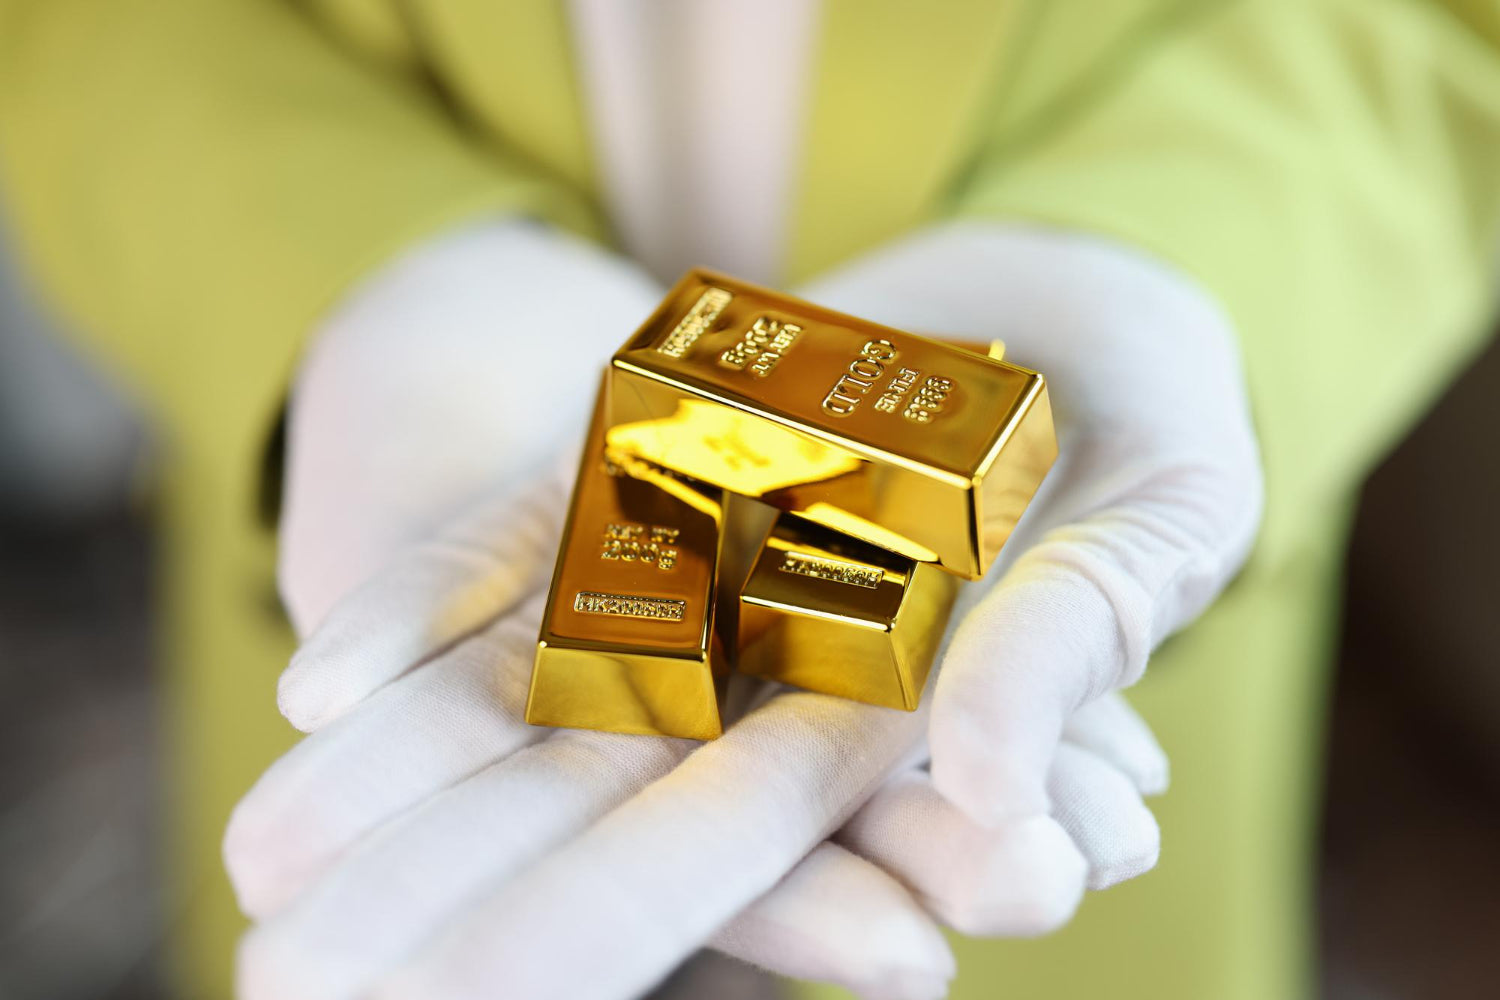 How to Tell if Gold is Real: 11 Easy Ways to Ensure You Have the Real Thing